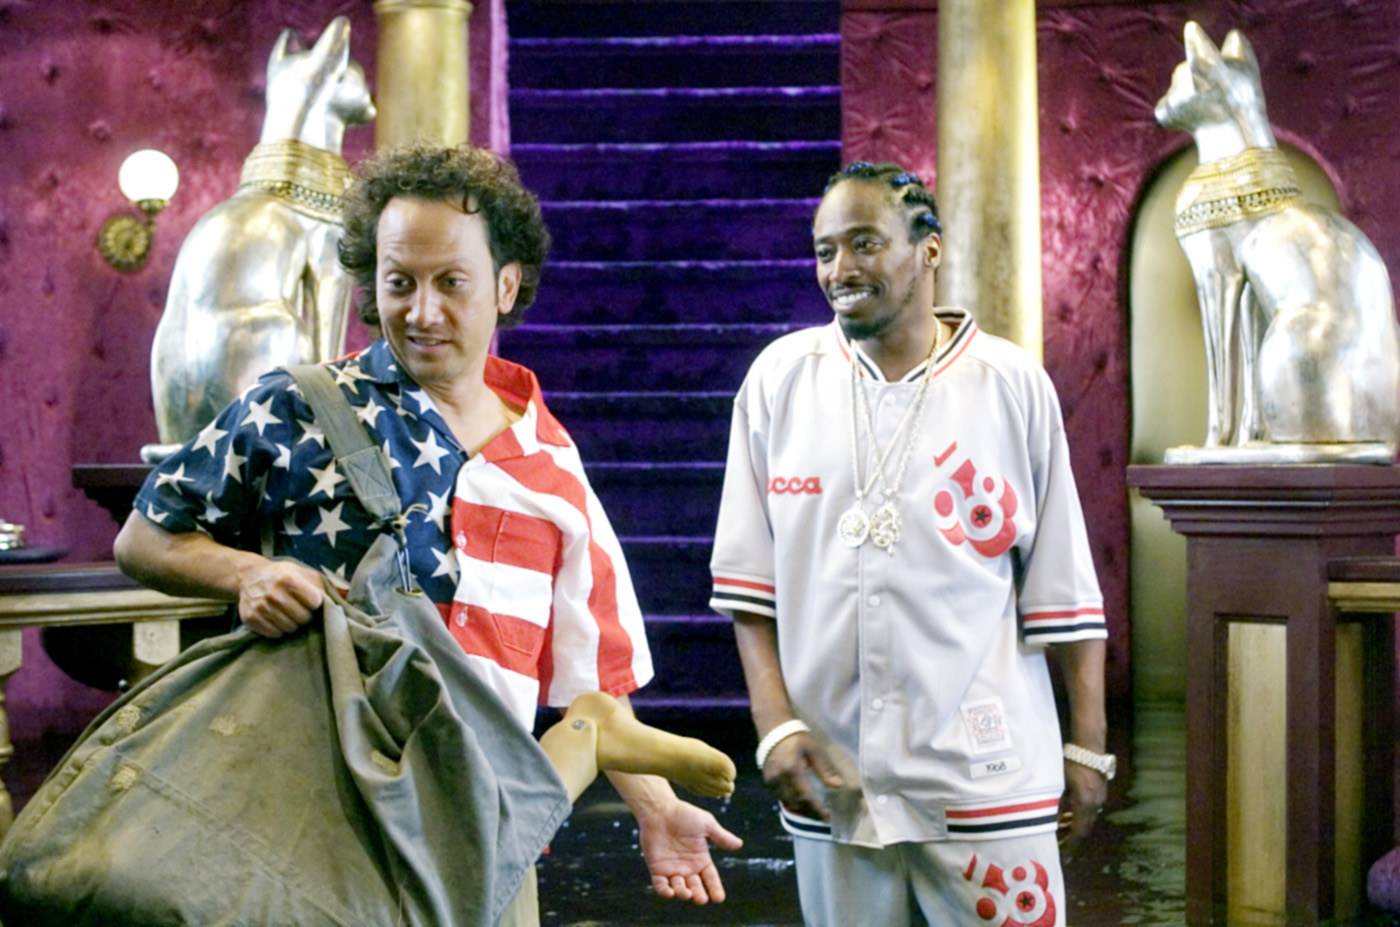 Rob Schneider as Deuce Bigalow and Eddie Griffin as T.J. Hicks in &quot;Deuce Bigalow: European Gigolo&quot;